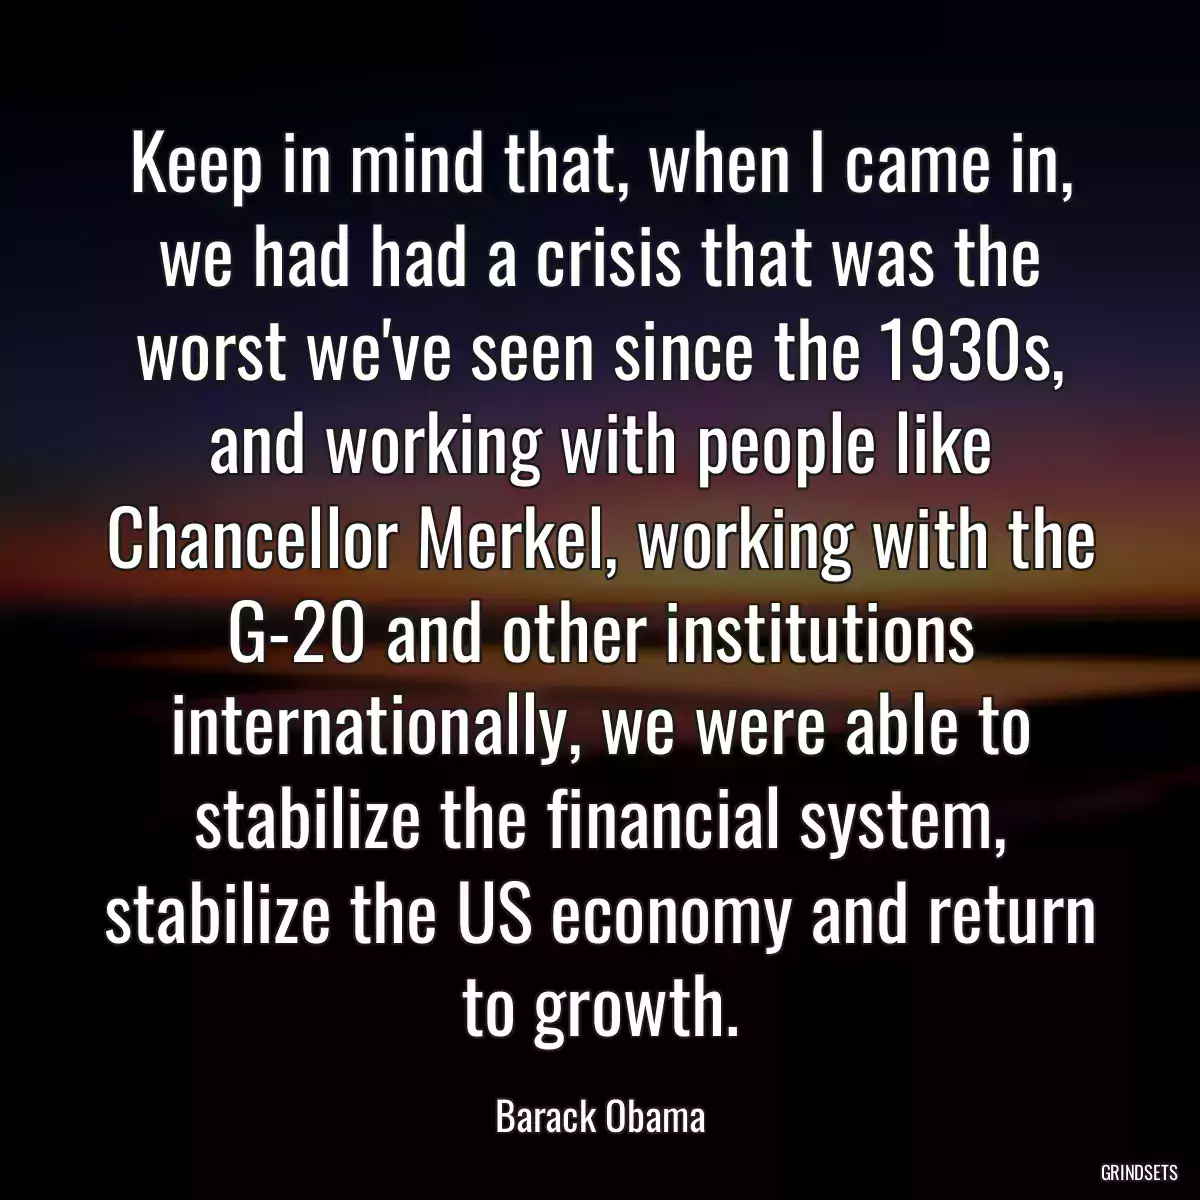 Keep in mind that, when I came in, we had had a crisis that was the worst we\'ve seen since the 1930s, and working with people like Chancellor Merkel, working with the G-20 and other institutions internationally, we were able to stabilize the financial system, stabilize the US economy and return to growth.